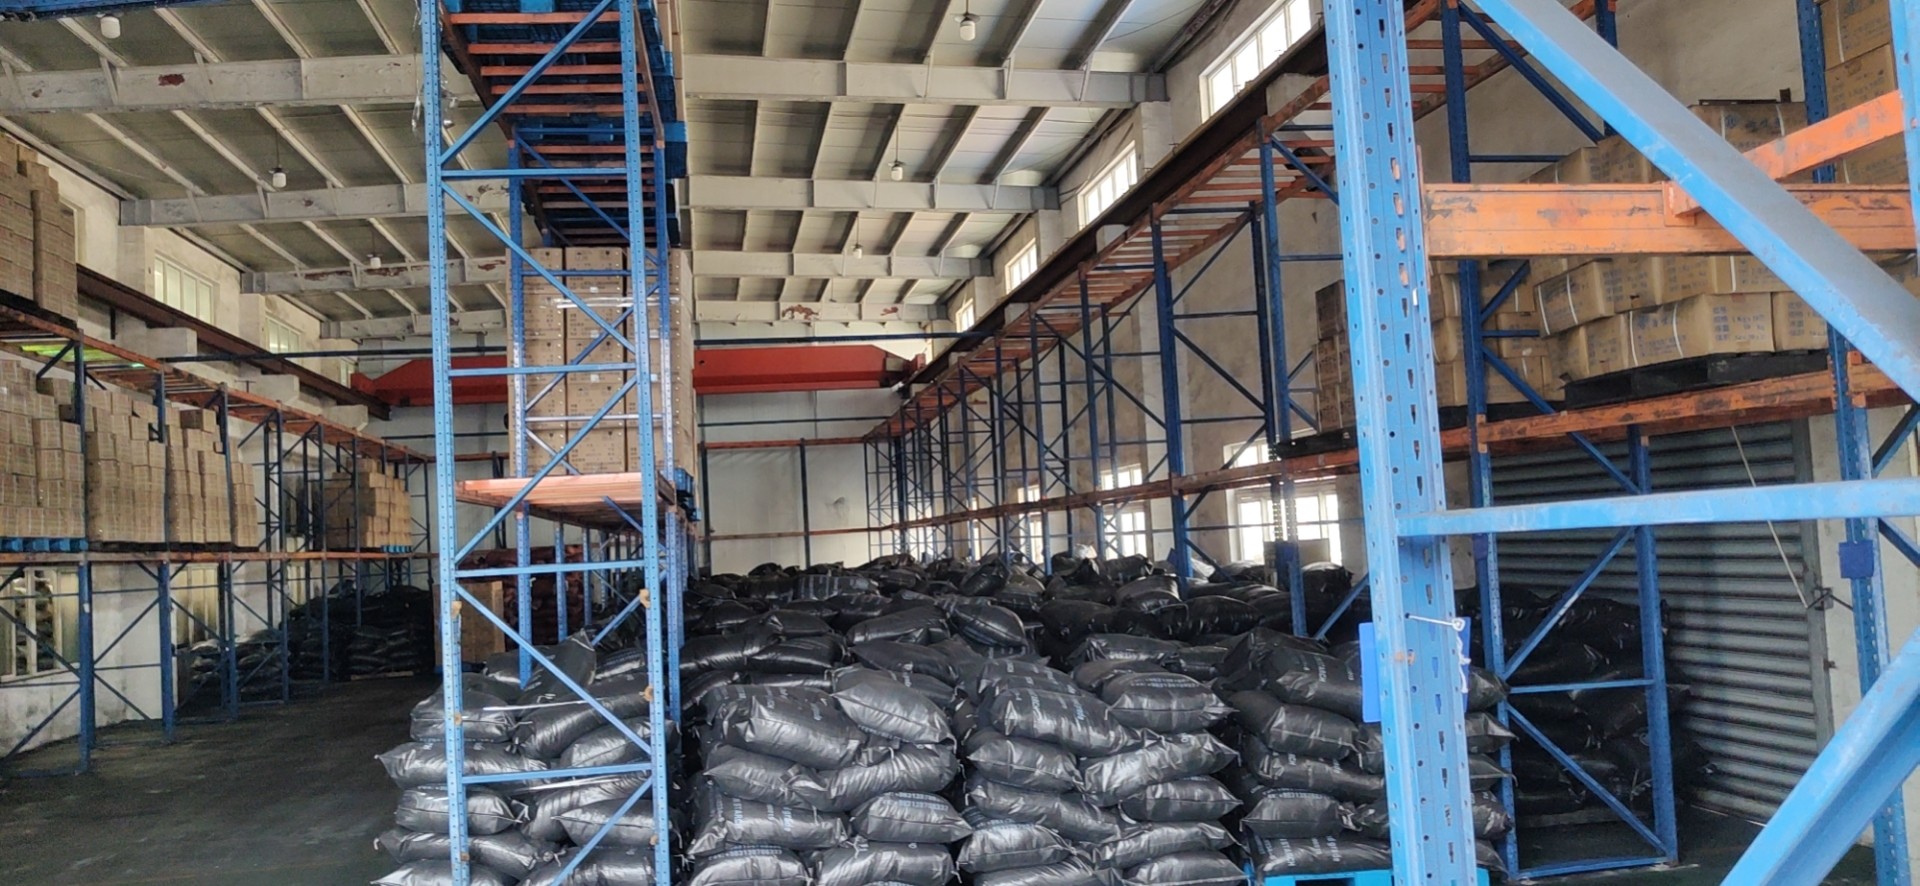 Bulk Wood Based Activated Carbon Powder For Medicine Purification